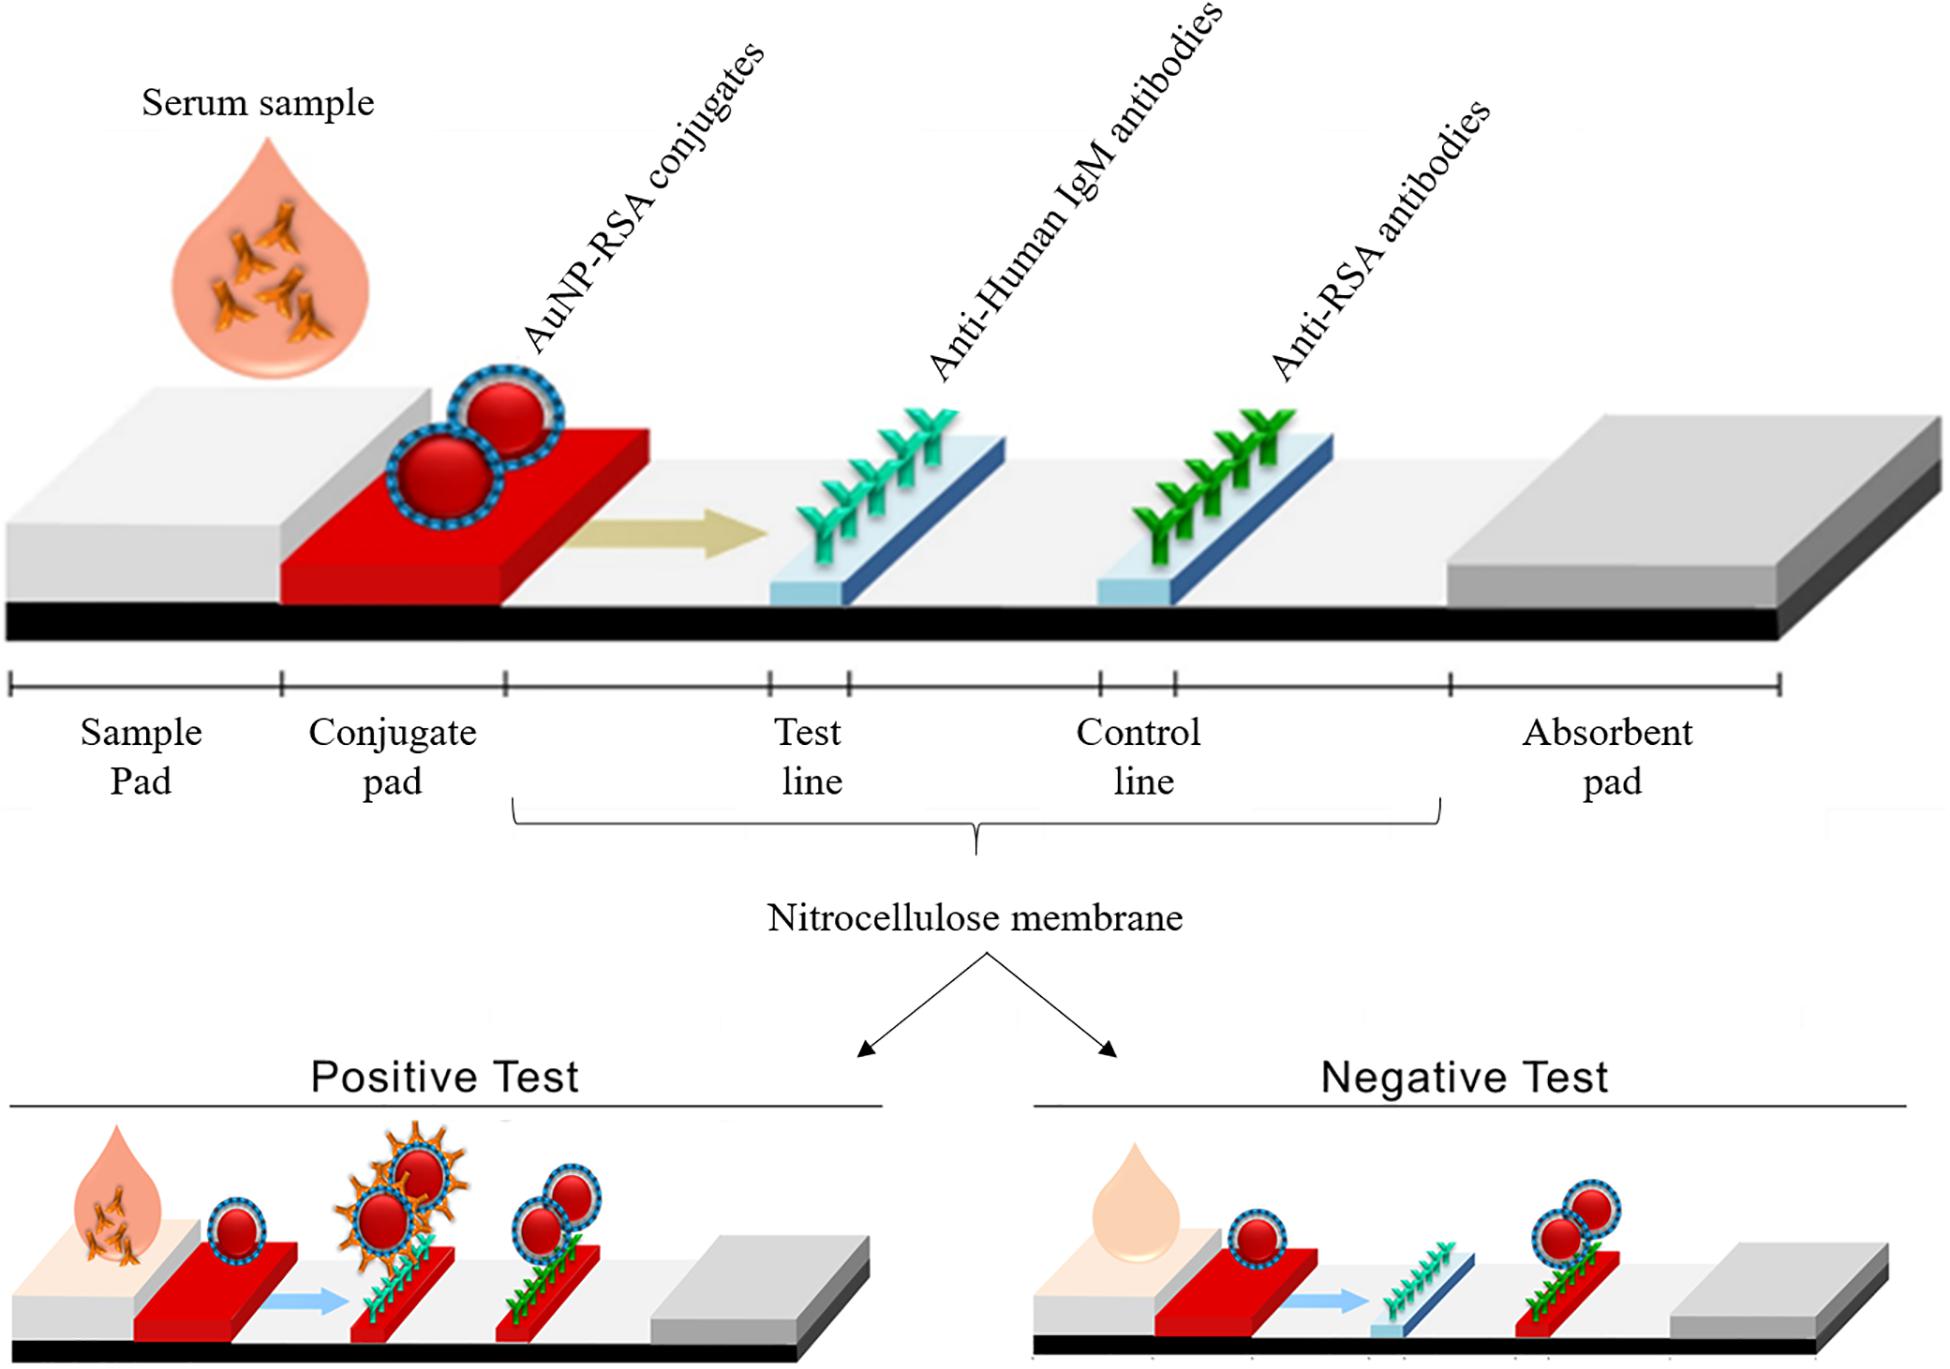 Frontiers Development Of A Gold Nanoparticle Based Lateral Flow Immunoassay For Pneumocystis